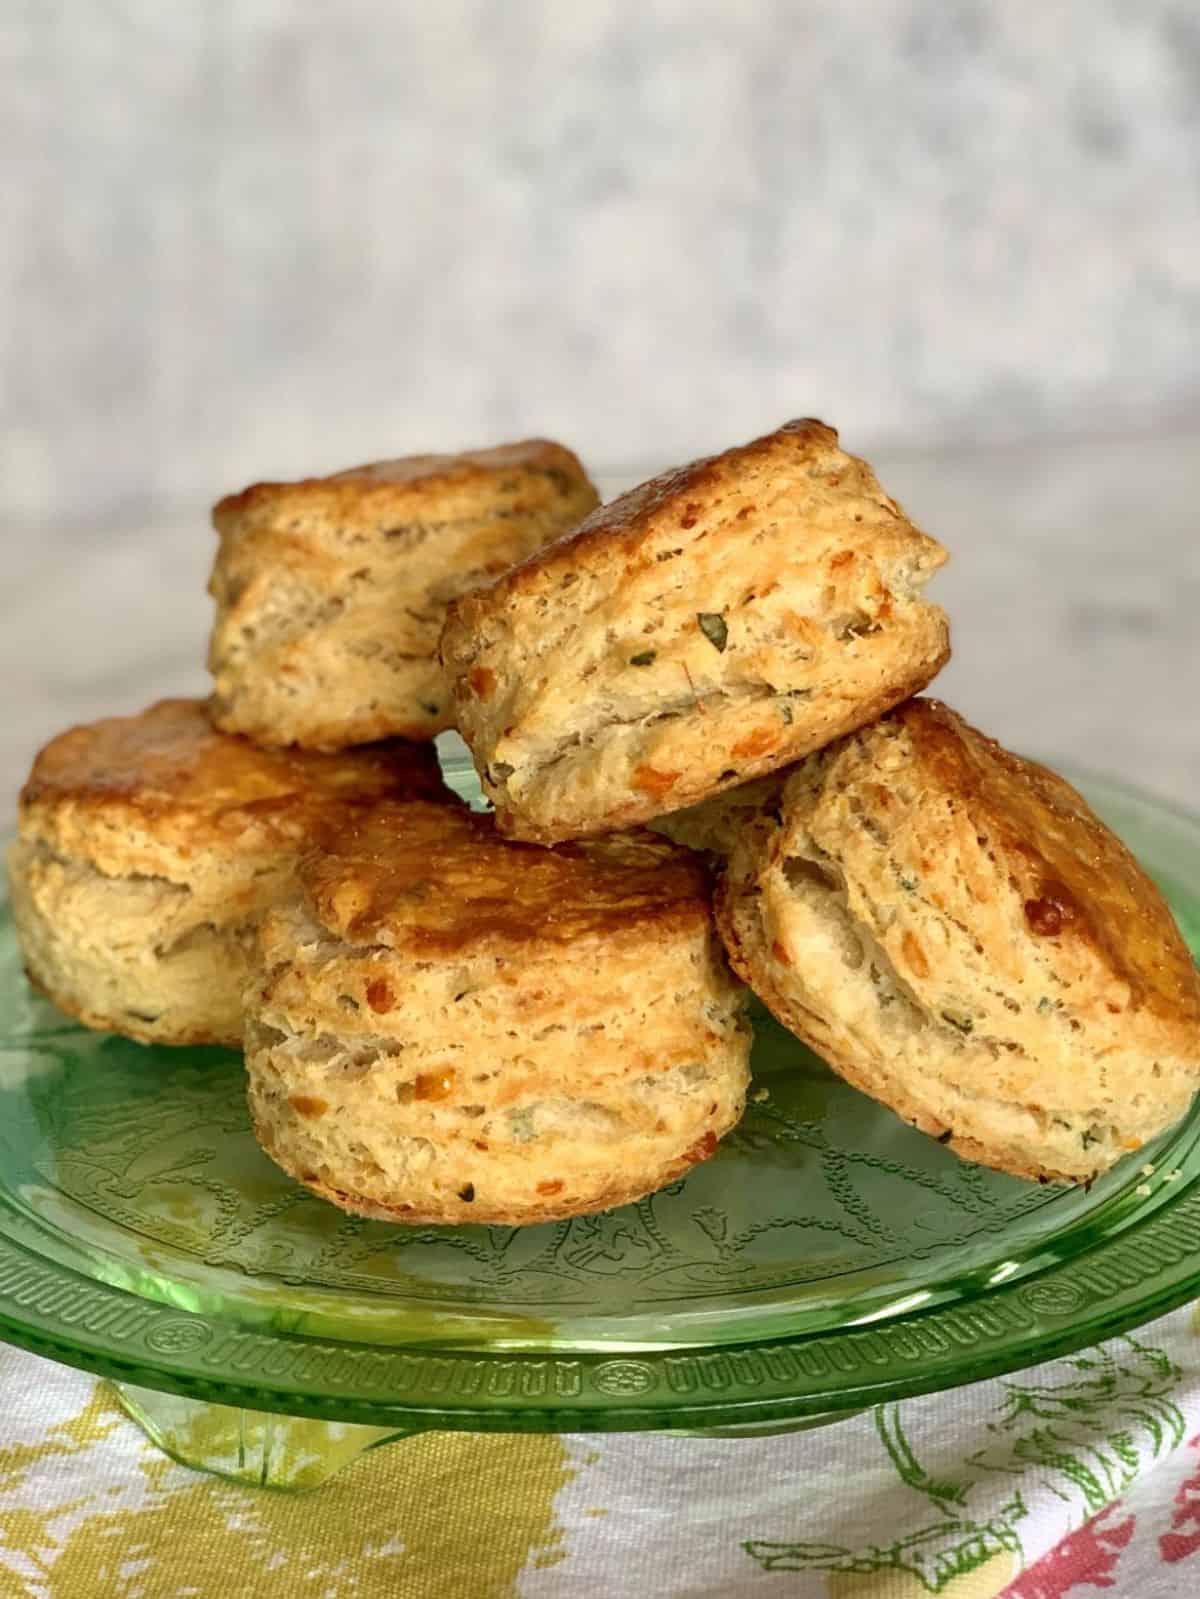 Cheddar and Herb Biscuits on a glass tray.